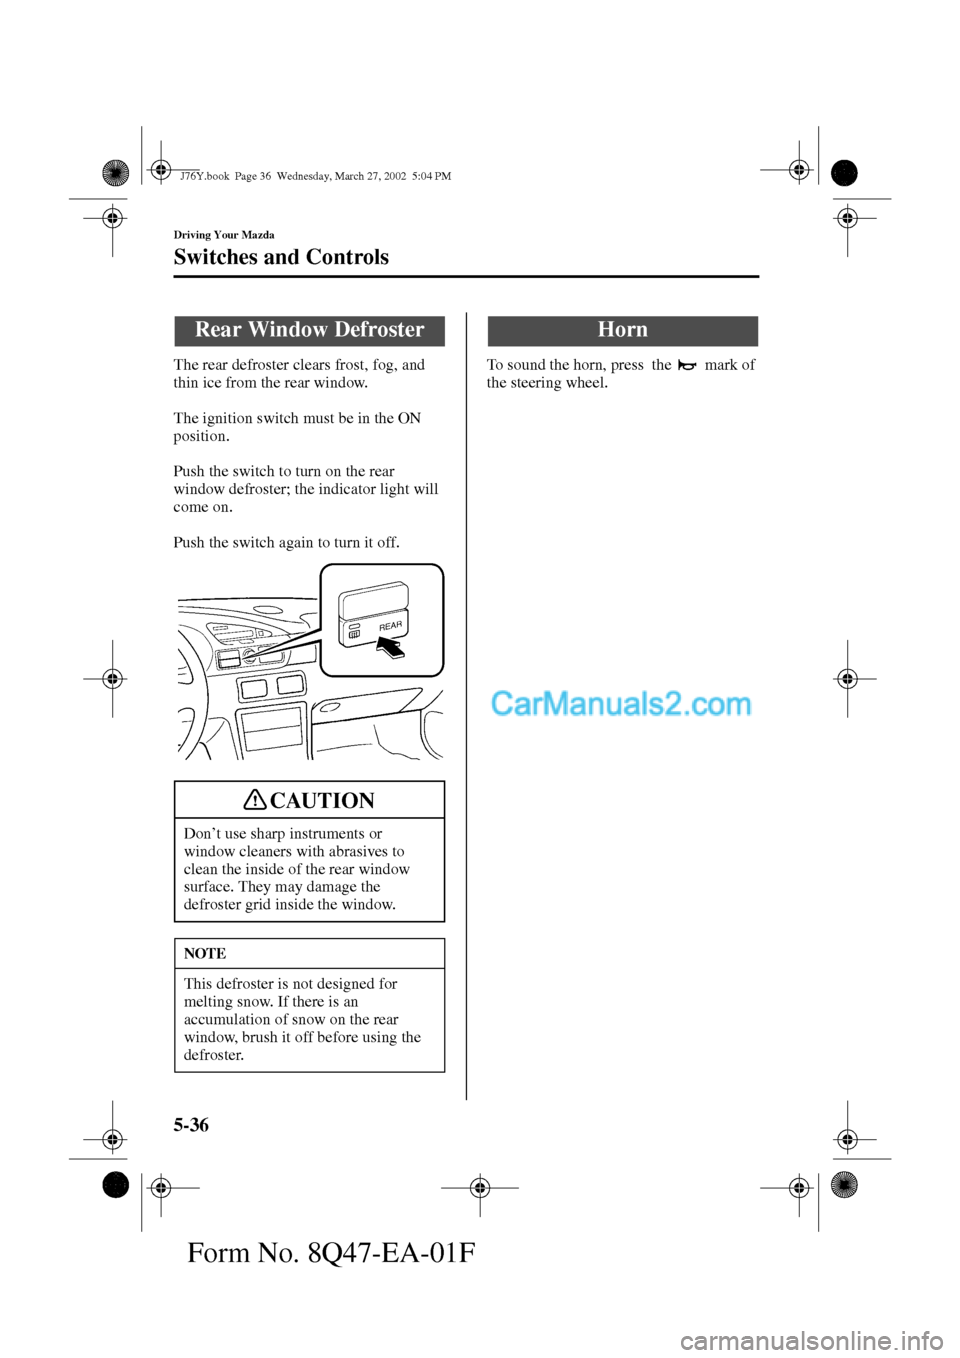 MAZDA MODEL MILLENIA 2002   (in English) Owners Manual 5-36
Driving Your Mazda
Switches and Controls
Form No. 8Q47-EA-01F
The rear defroster clears frost, fog, and 
thin ice from the rear window.
The ignition switch must be in the ON 
position.
Push the s